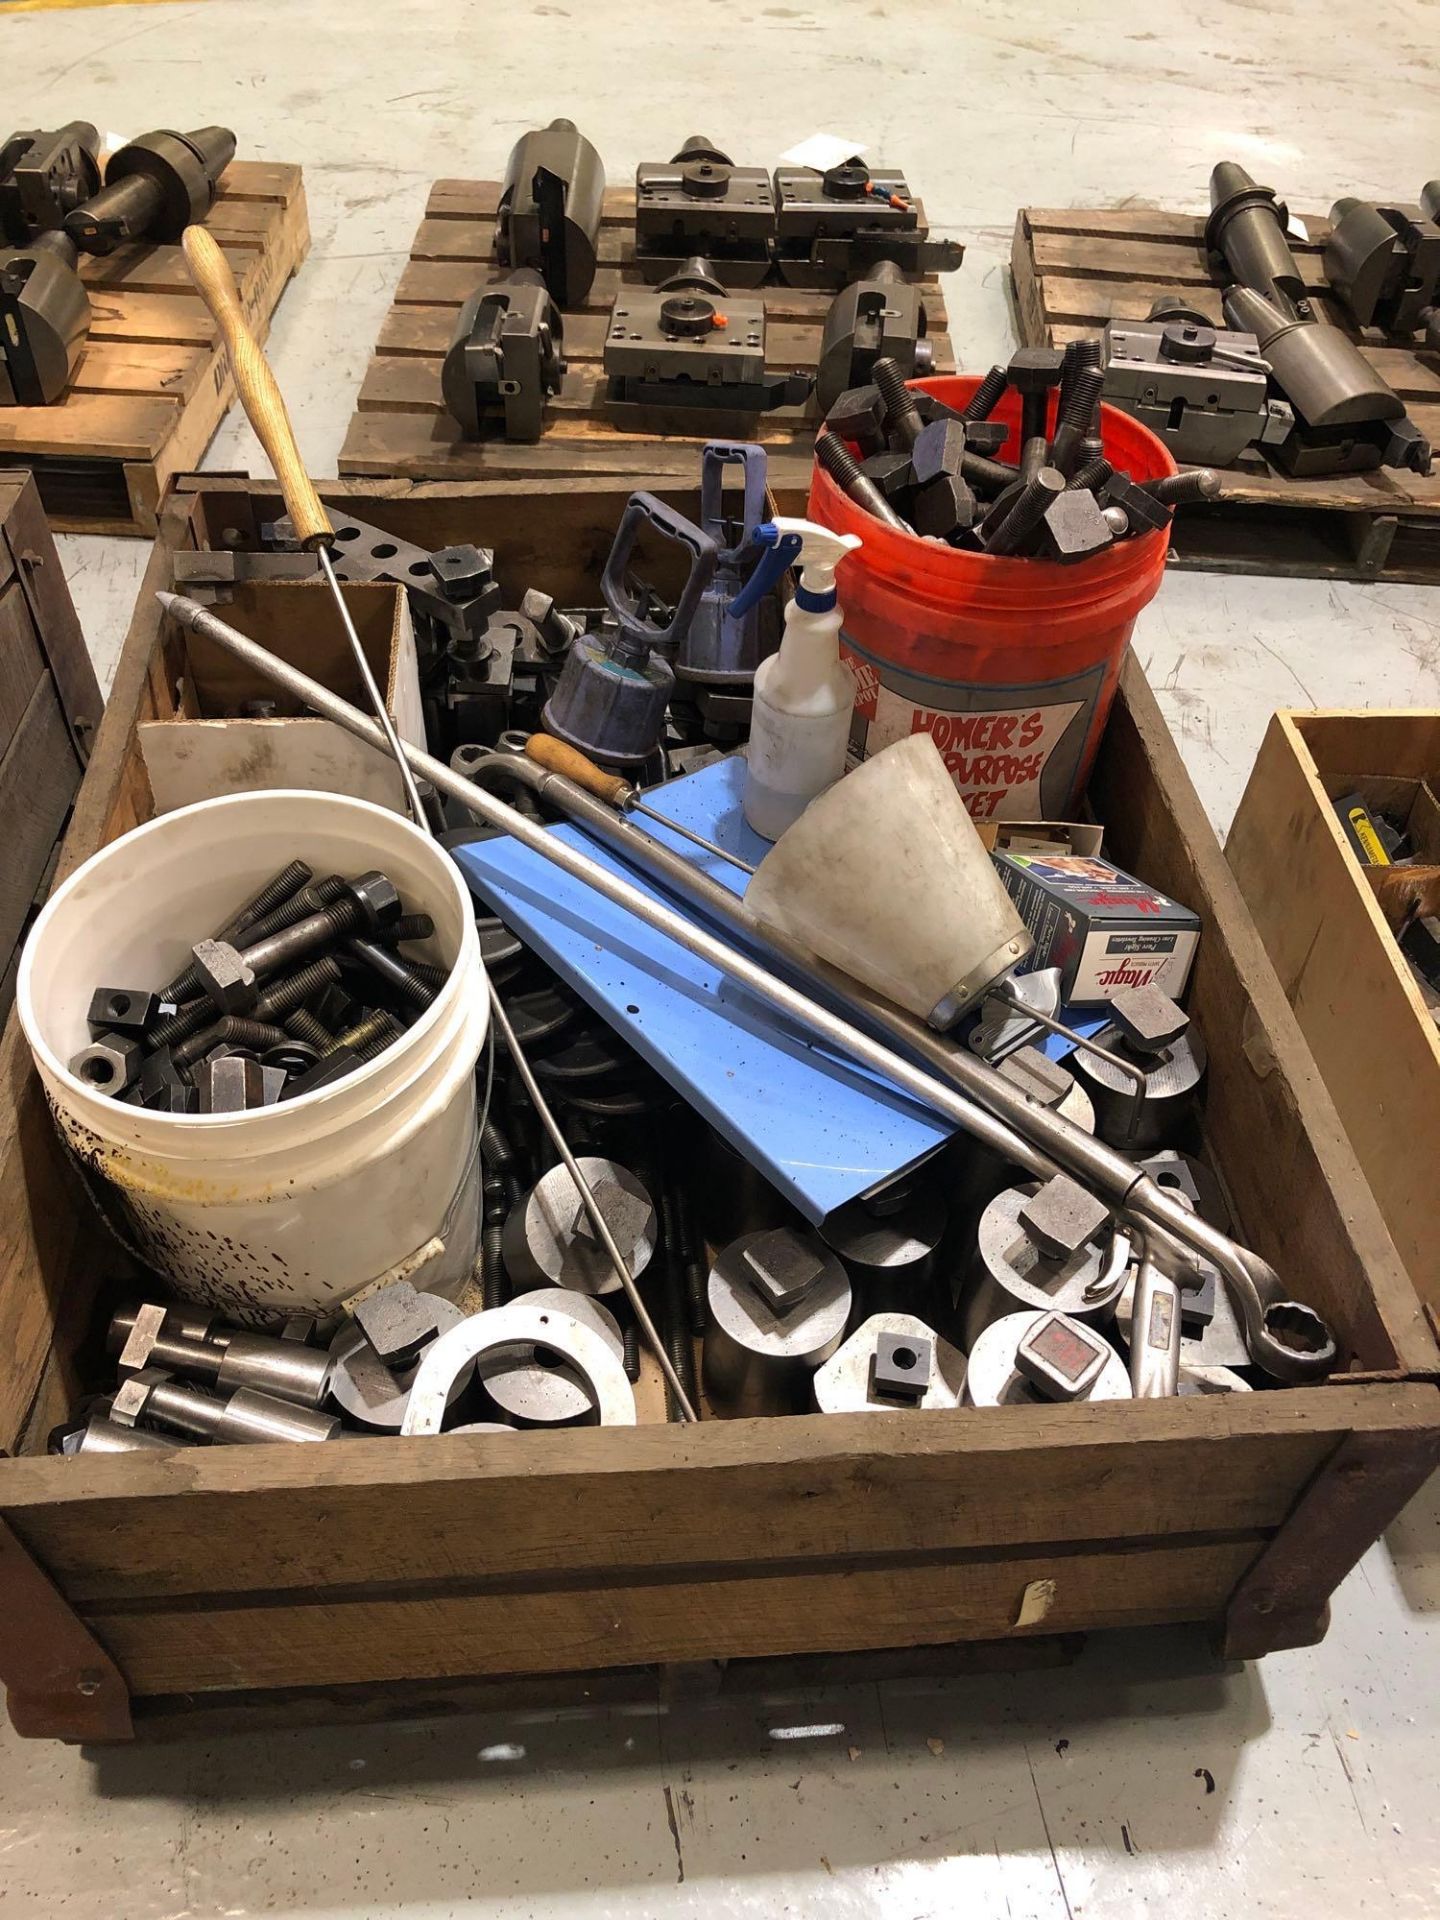 Lot of Misc Hold downs & Set-up Tooling for VTL in Wood Box / Crate